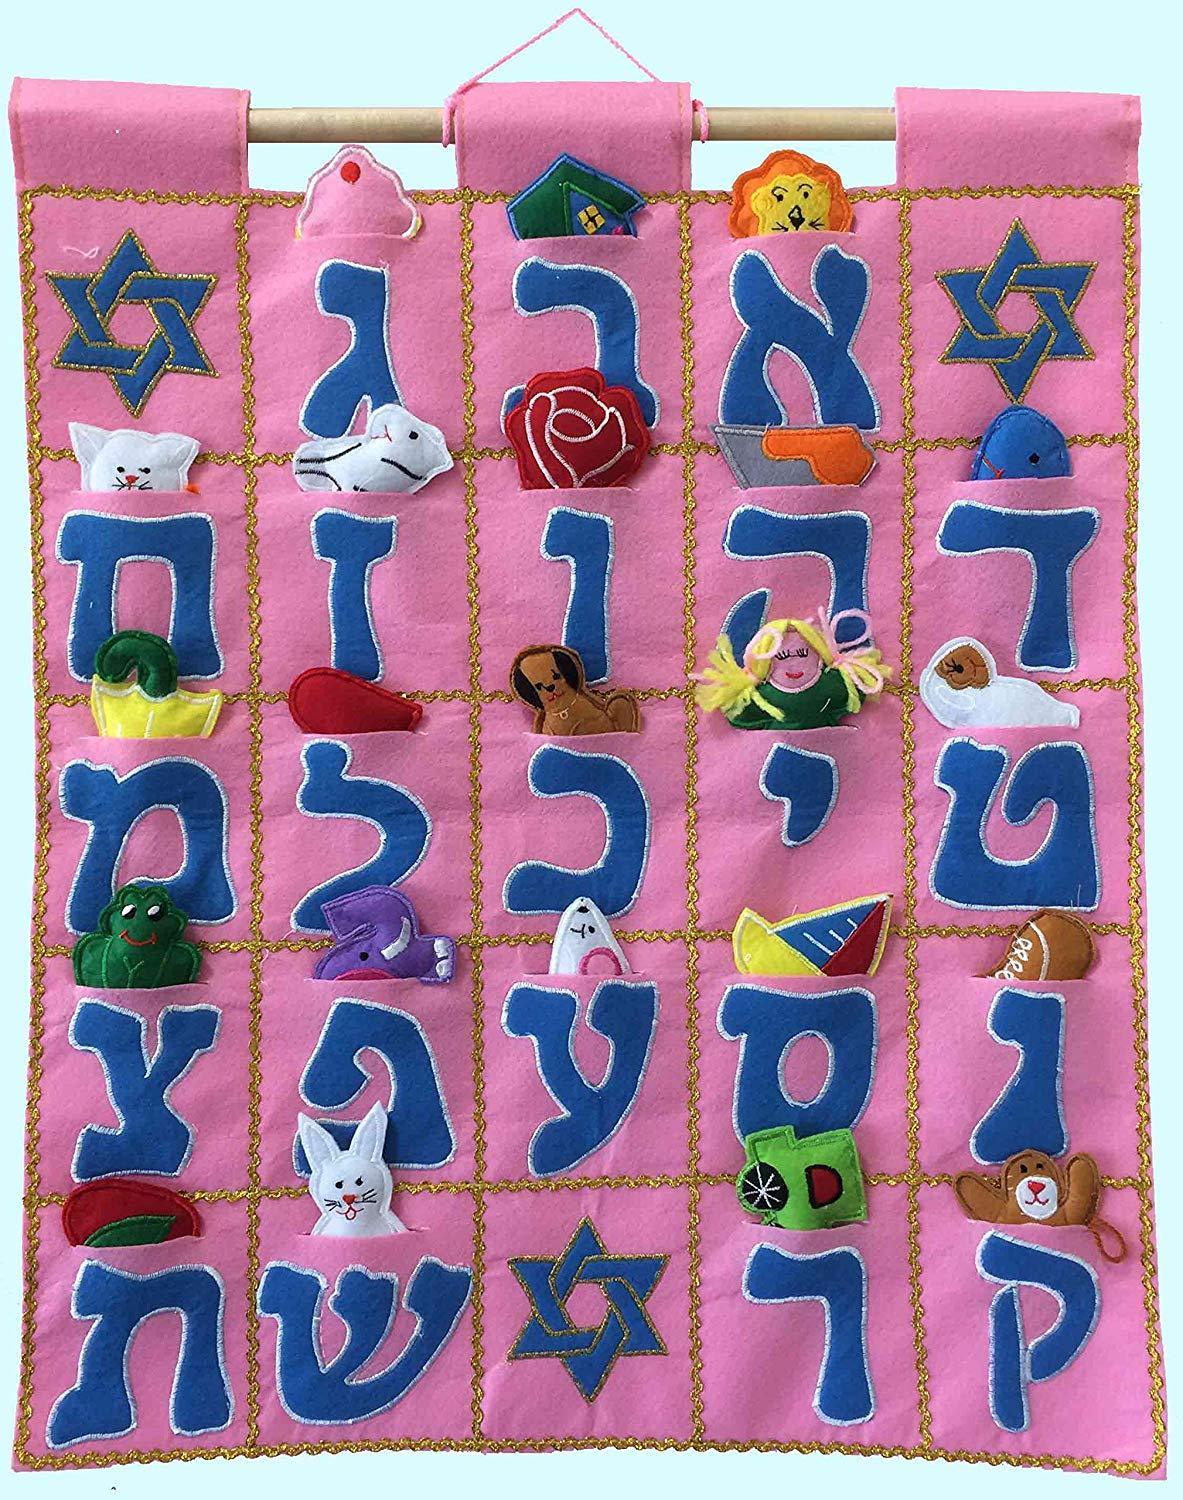 ModernTribe Toys Aleph Bet Wall Hanging – Pink